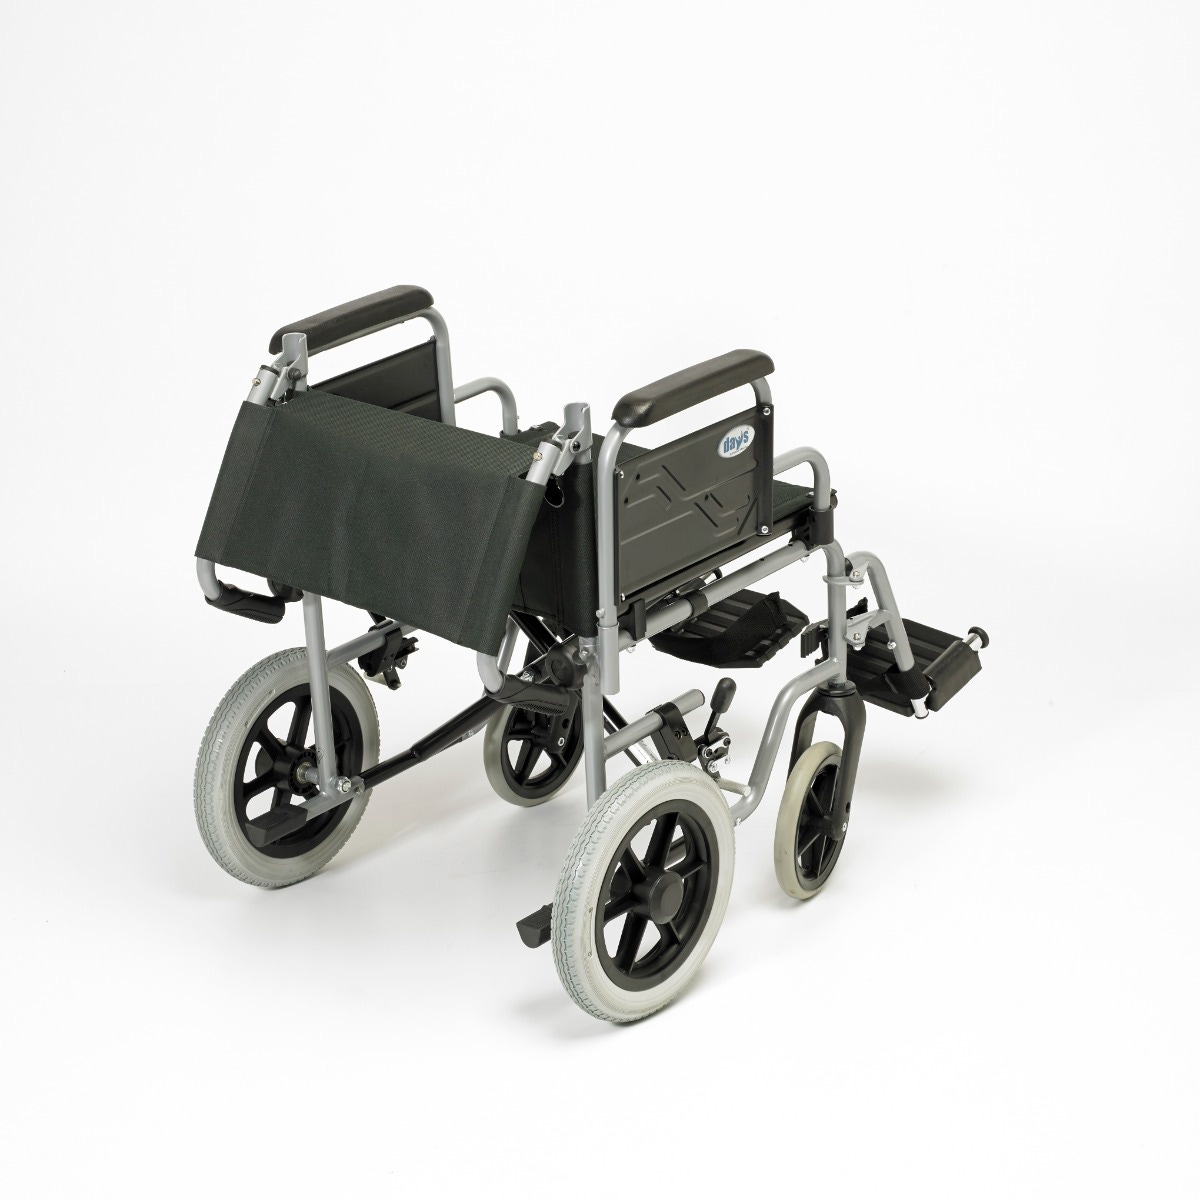 Whirl Attendant Propelled Wheelchairs